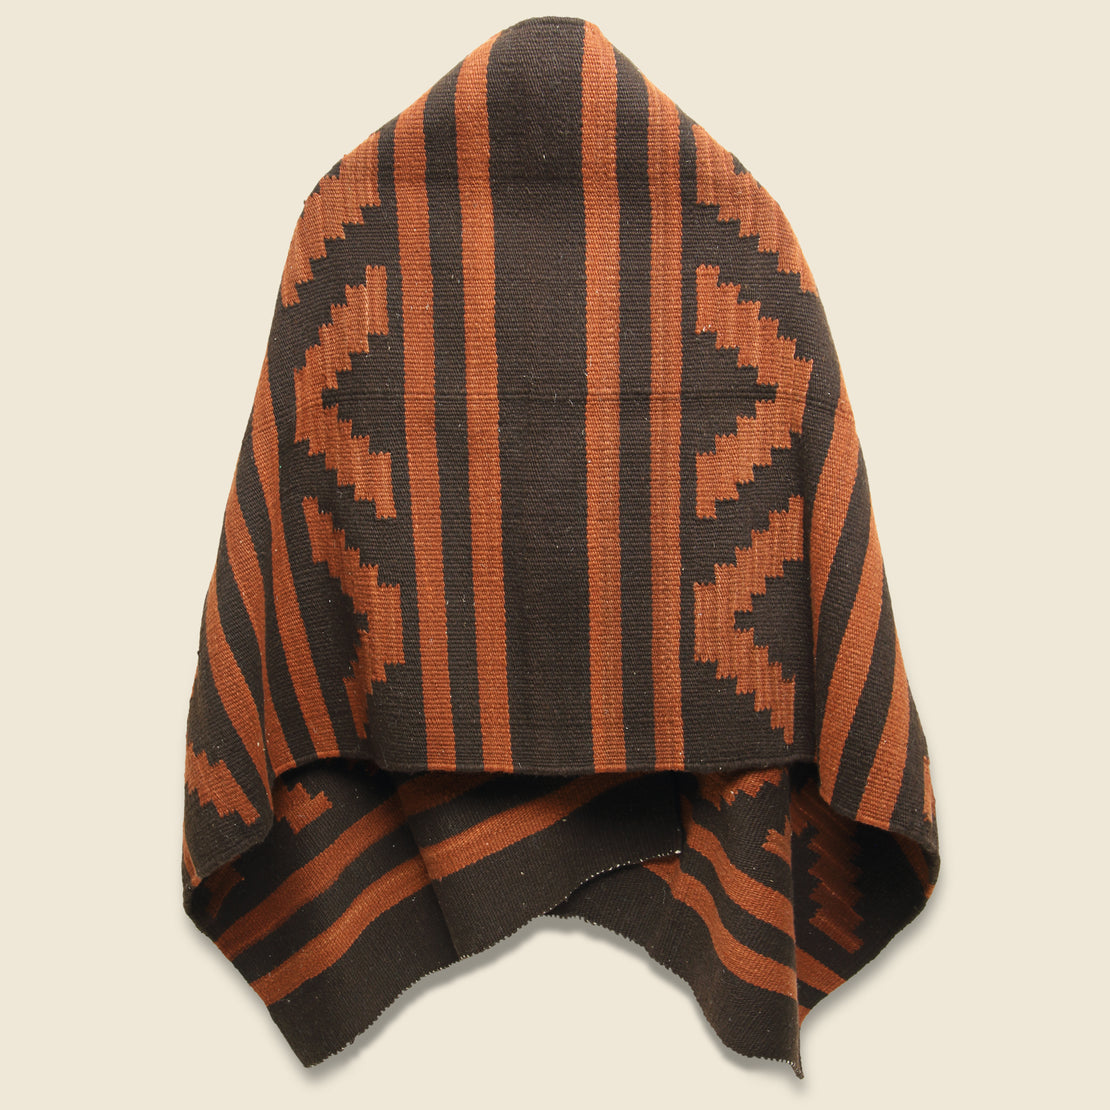 Wool Blanket Poncho - Chocolate/Rust - Chamula - STAG Provisions - W - Tops - Poncho